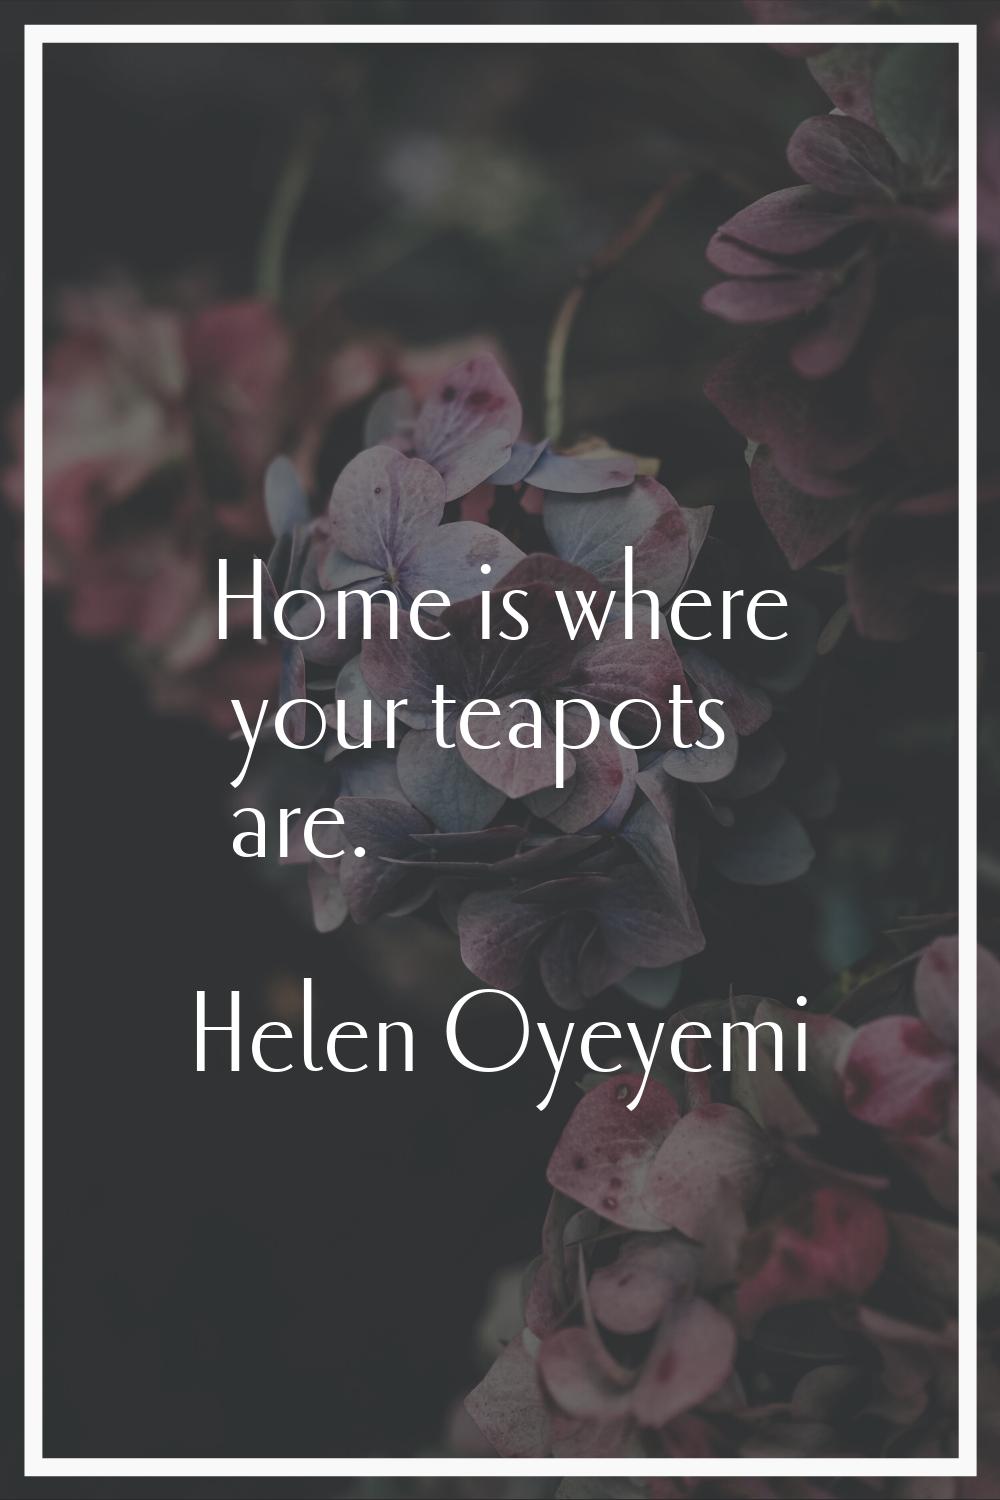 Home is where your teapots are.